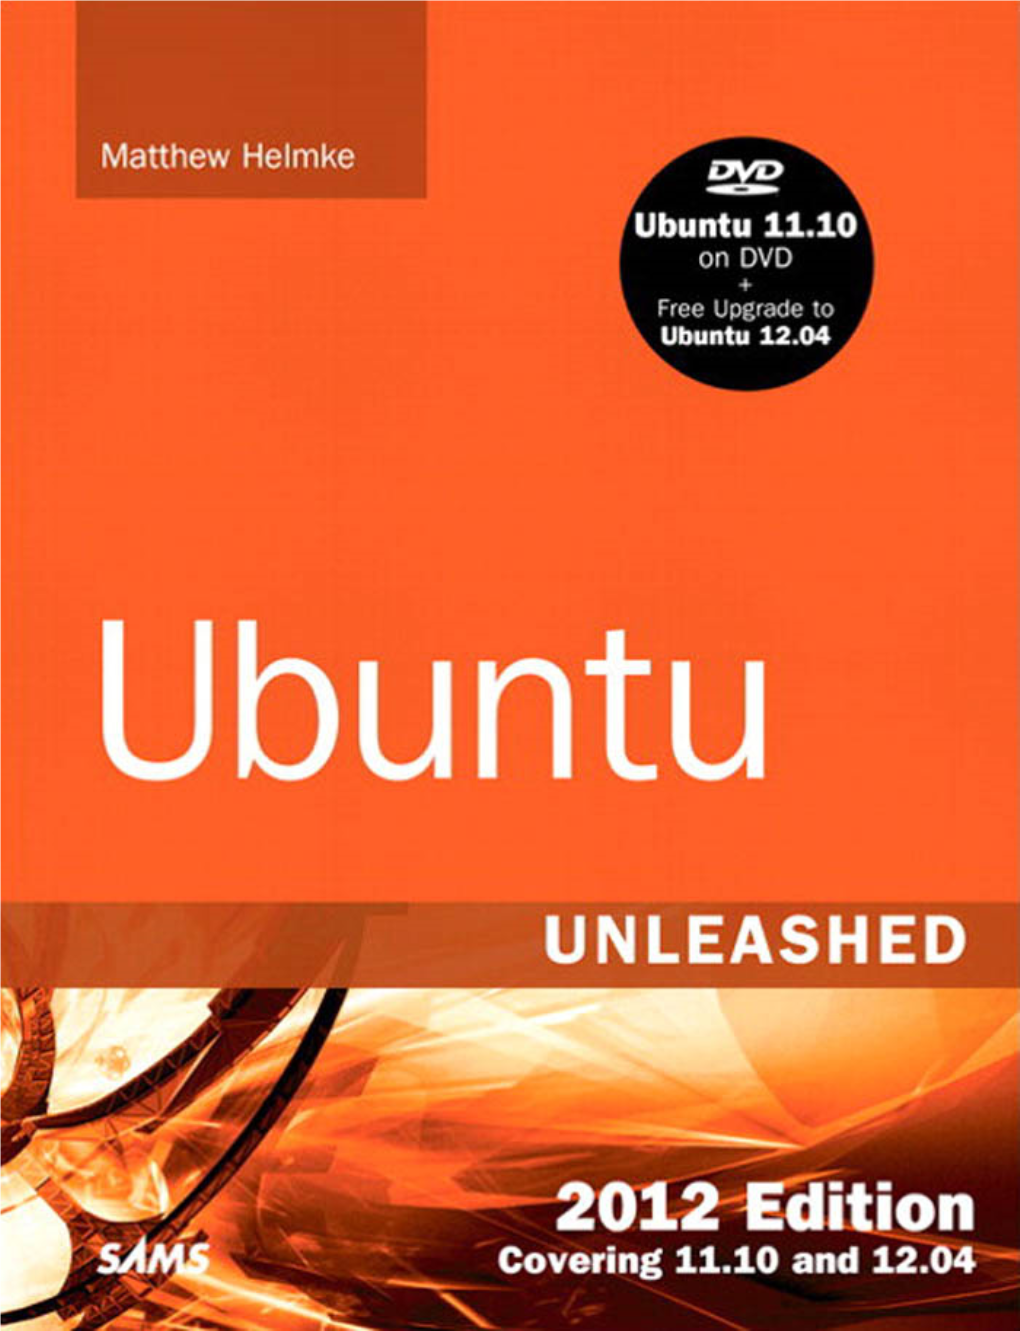 Ubuntu UNLEASHED 2012 Edition Covering 11.10 and 12.04